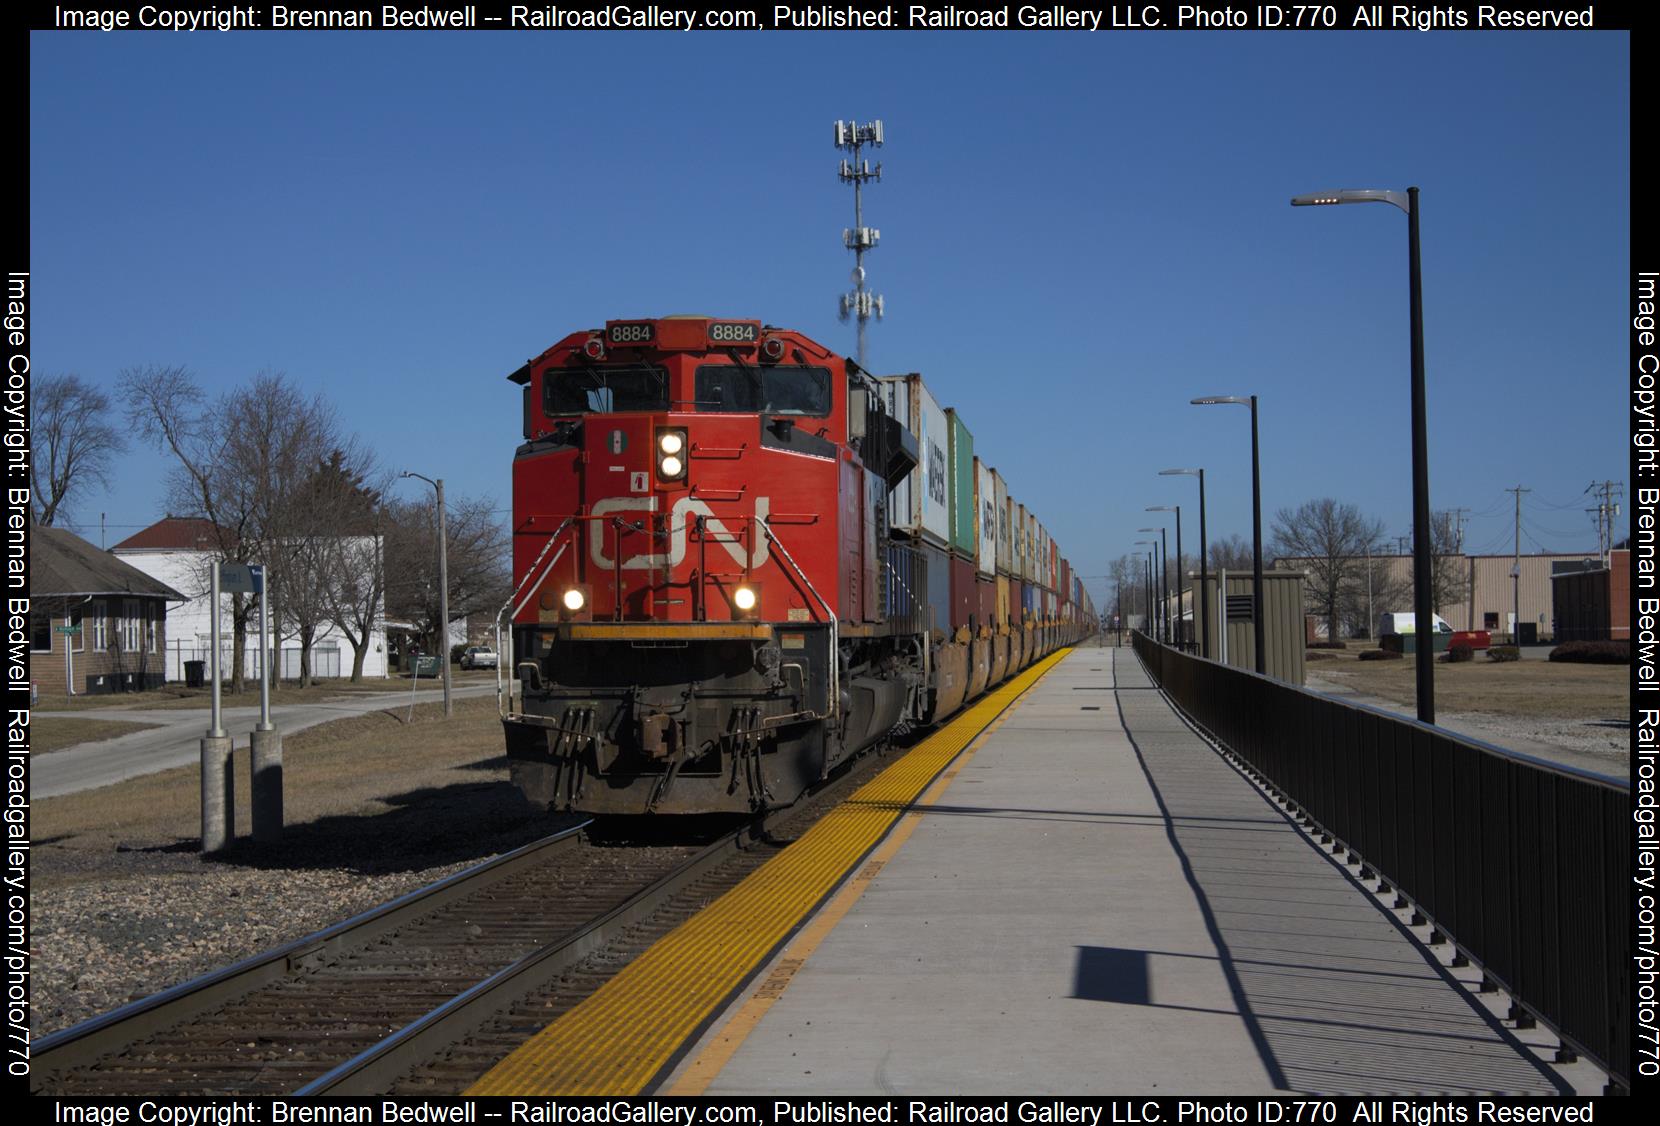 CN 8884 is a class SD70M-2 and  is pictured in Effingham, Illinois, United States.  This was taken along the Champaign Subdivision on the Canadian National Railway. Photo Copyright: Brennan Bedwell uploaded to Railroad Gallery on 02/27/2023. This photograph of CN 8884 was taken on Sunday, February 12, 2023. All Rights Reserved. 